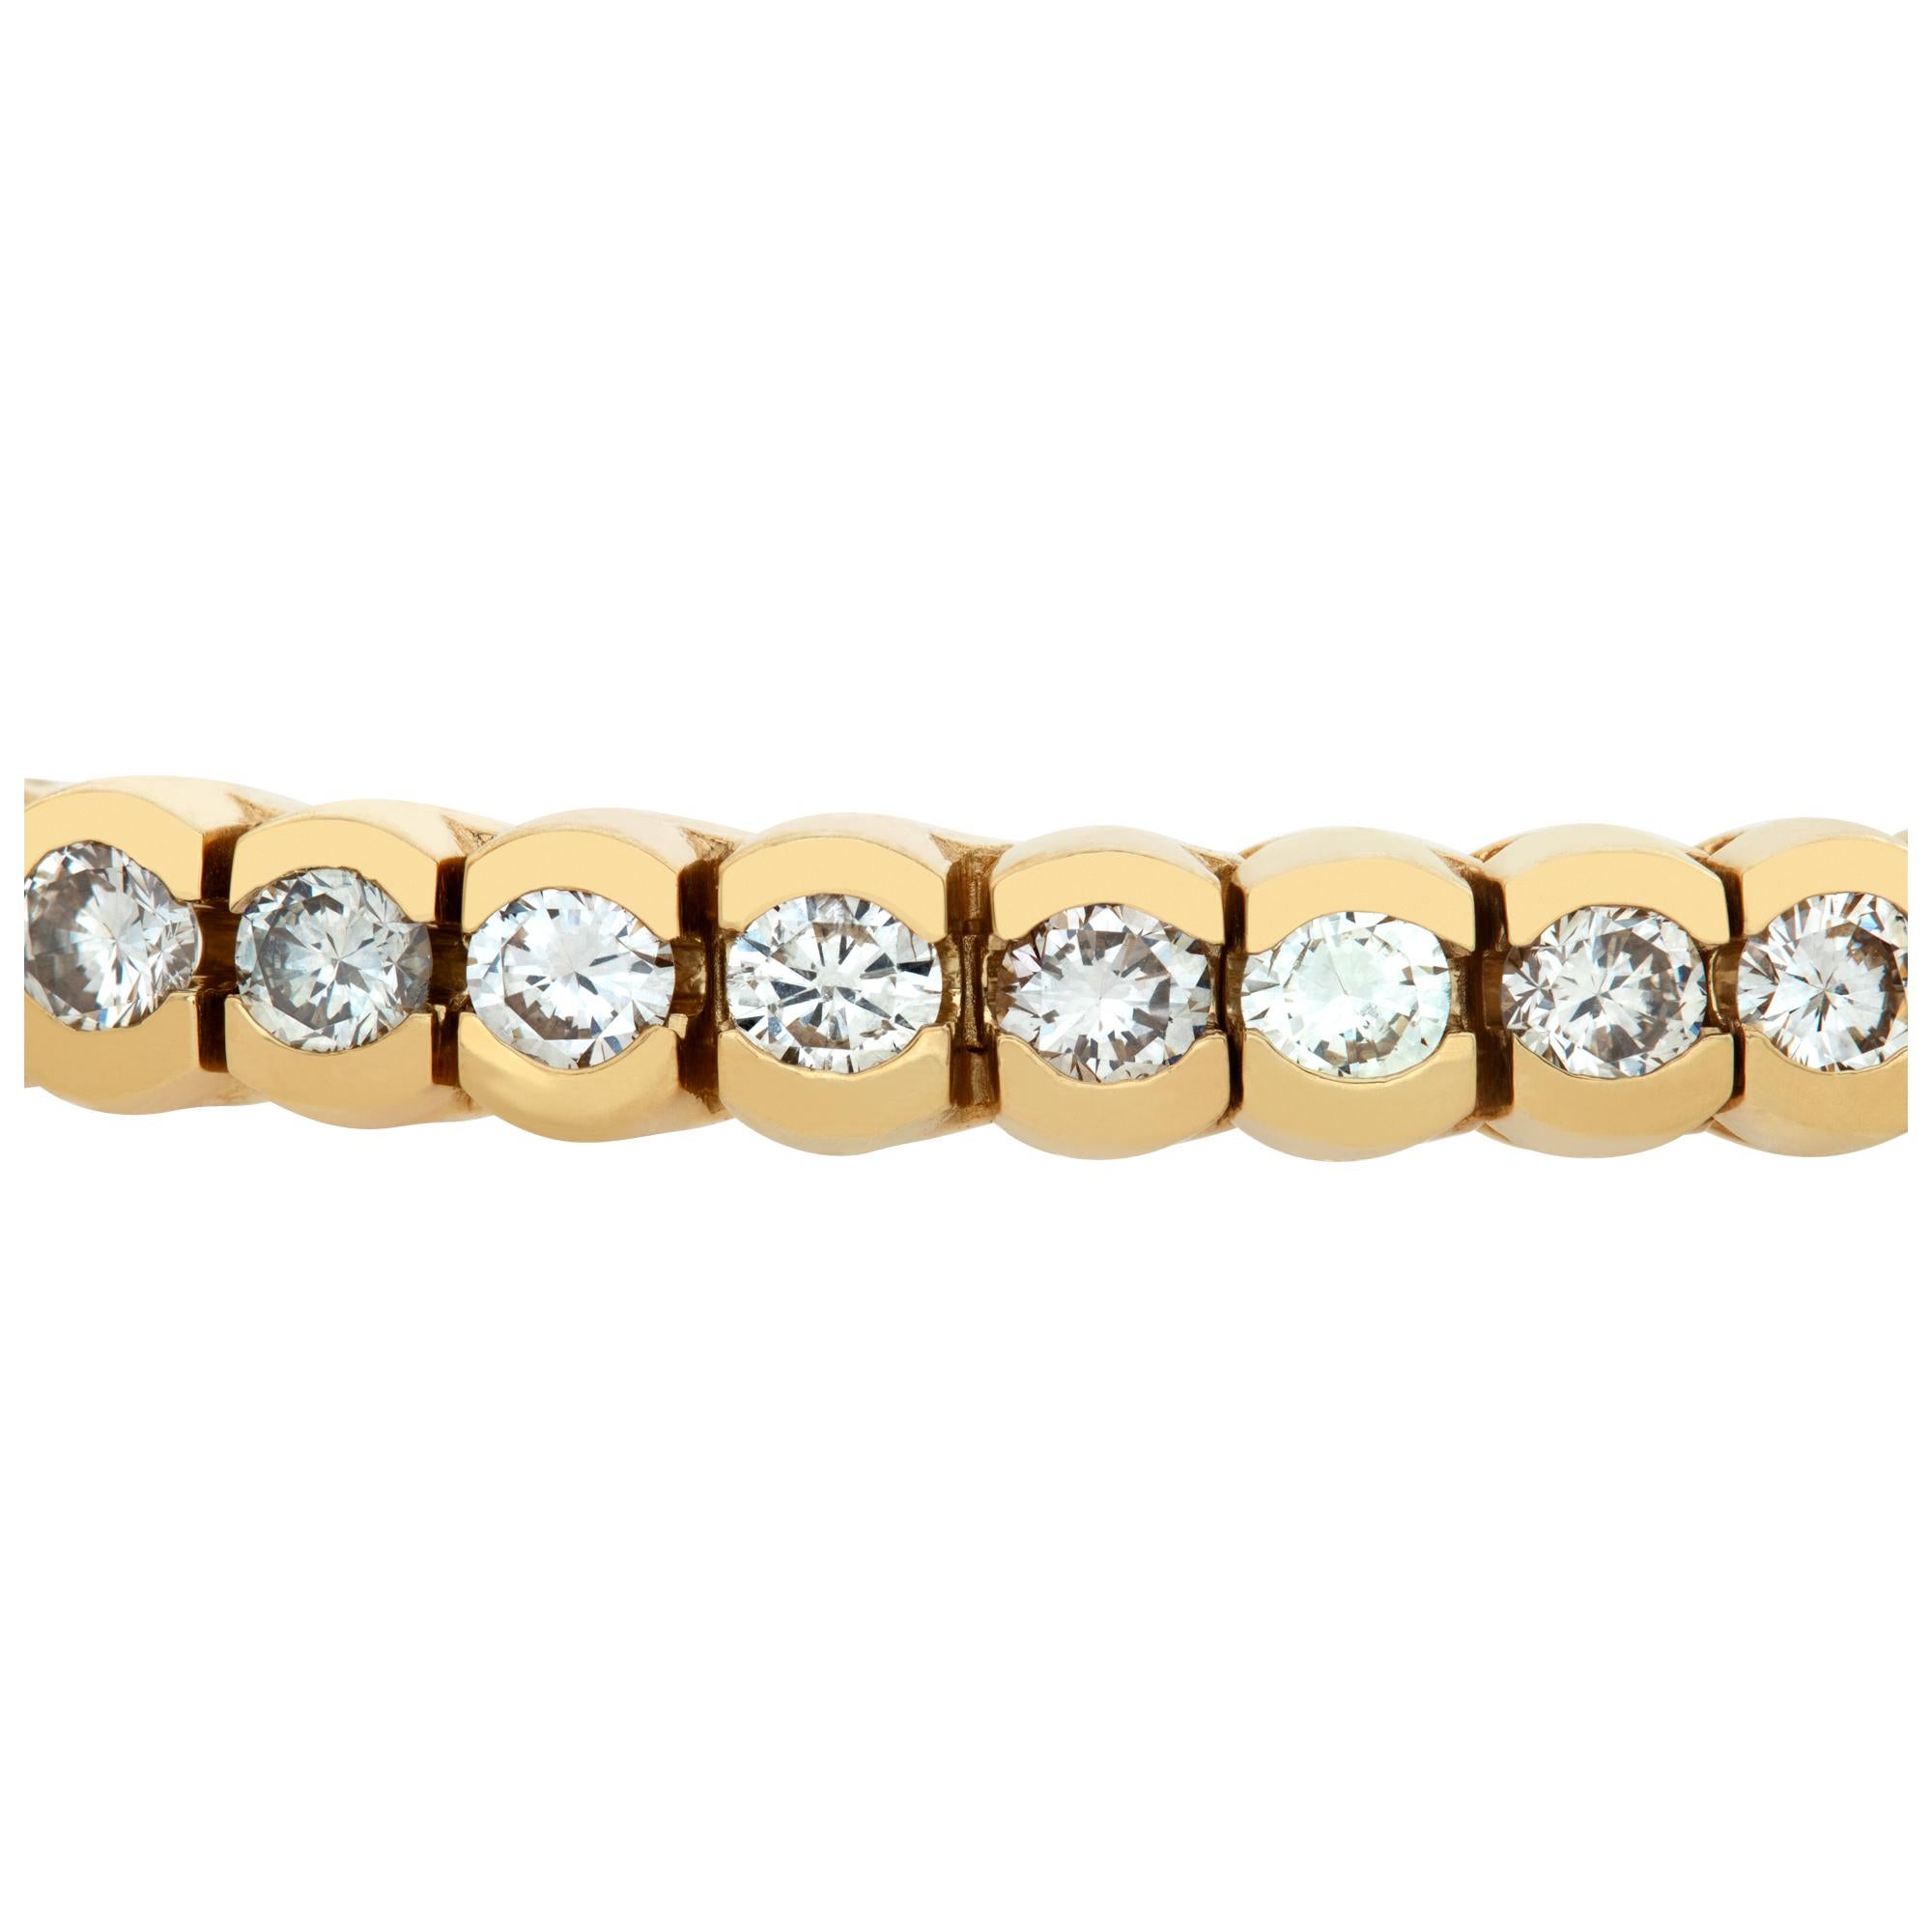 Elegant diamond line bracelet in 14k yellow gold with over 7 carats in round diamonds (J-K color, SI clarity), 7 inch length, 5mm width.
